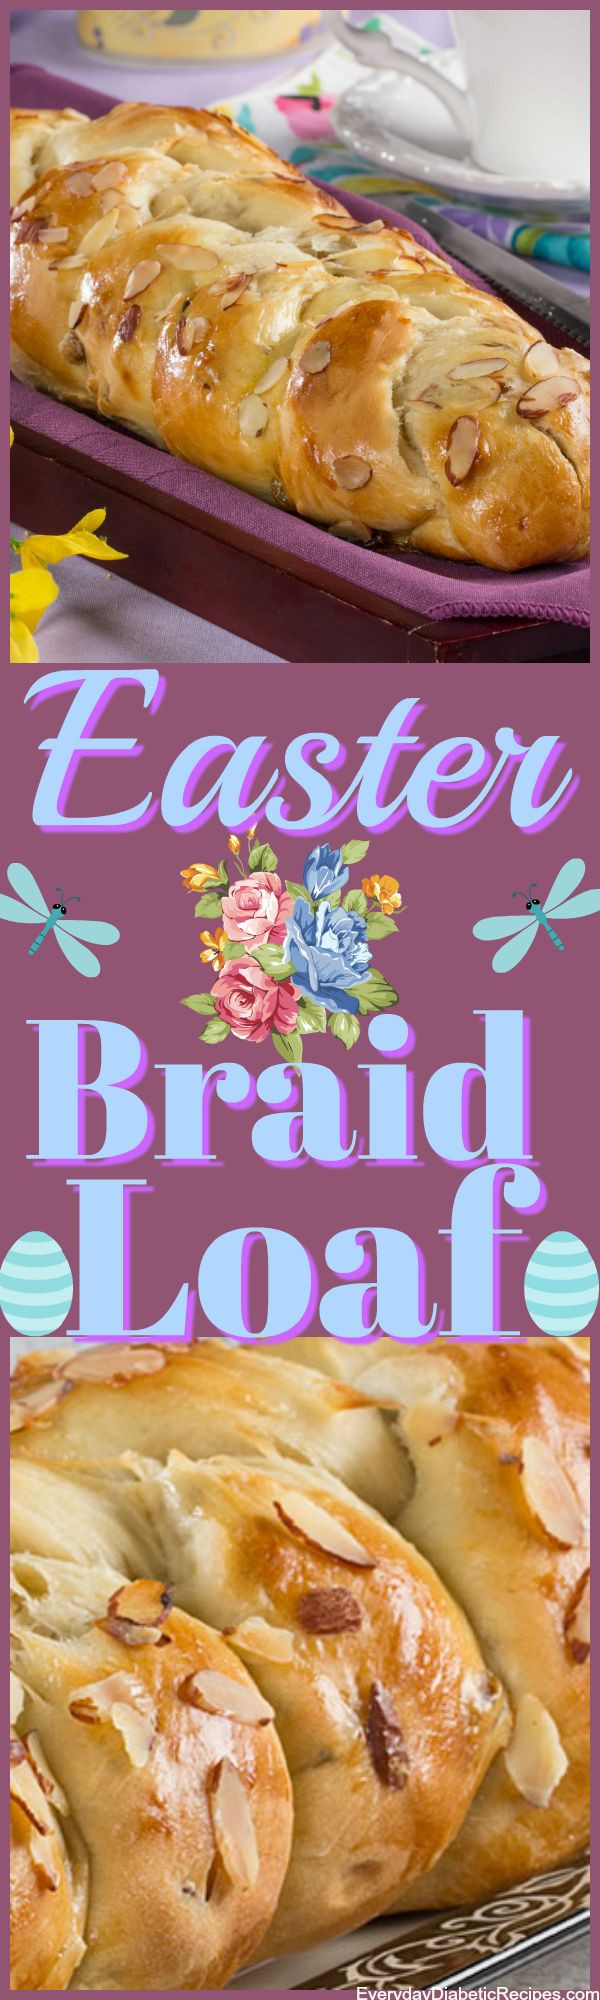 Diabetic Easter Recipes
 Wishing everyone a safe and happy Easter braidloaf